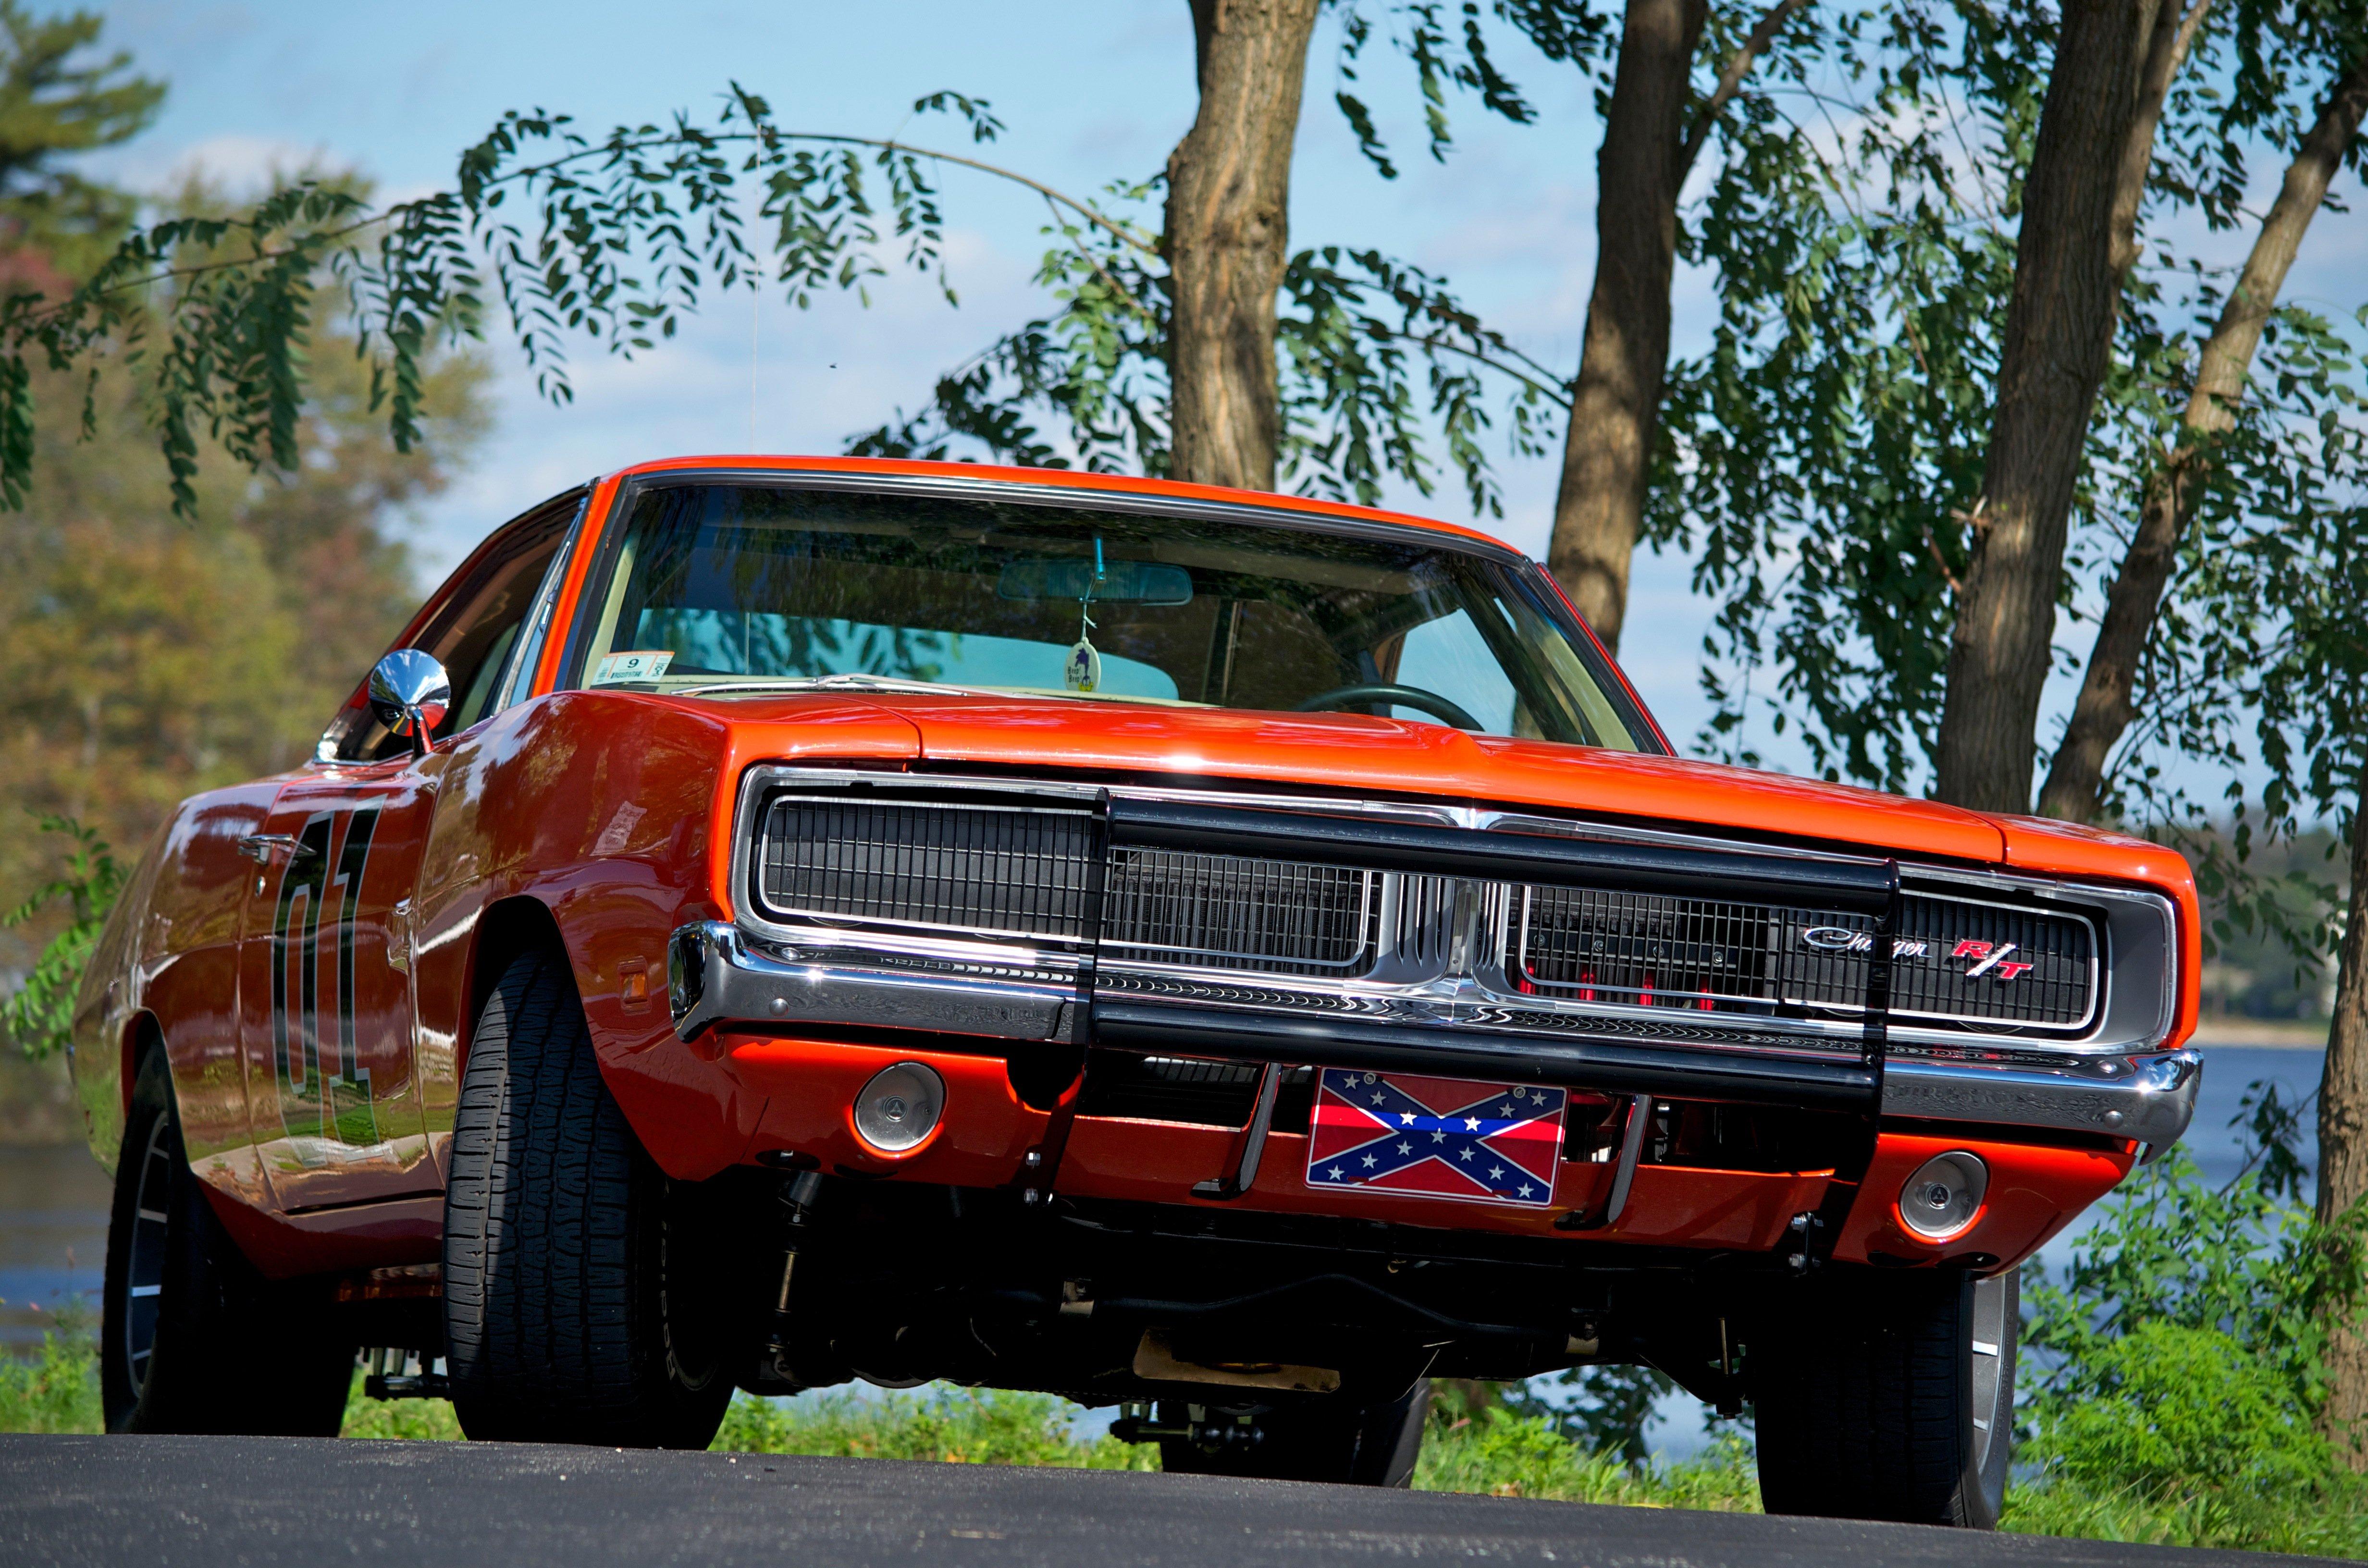 HD wallpaper, General Lee, Red Cars, Pop Up Headlights, Dodge Charger, Vehicle, Confederate Flag, Car